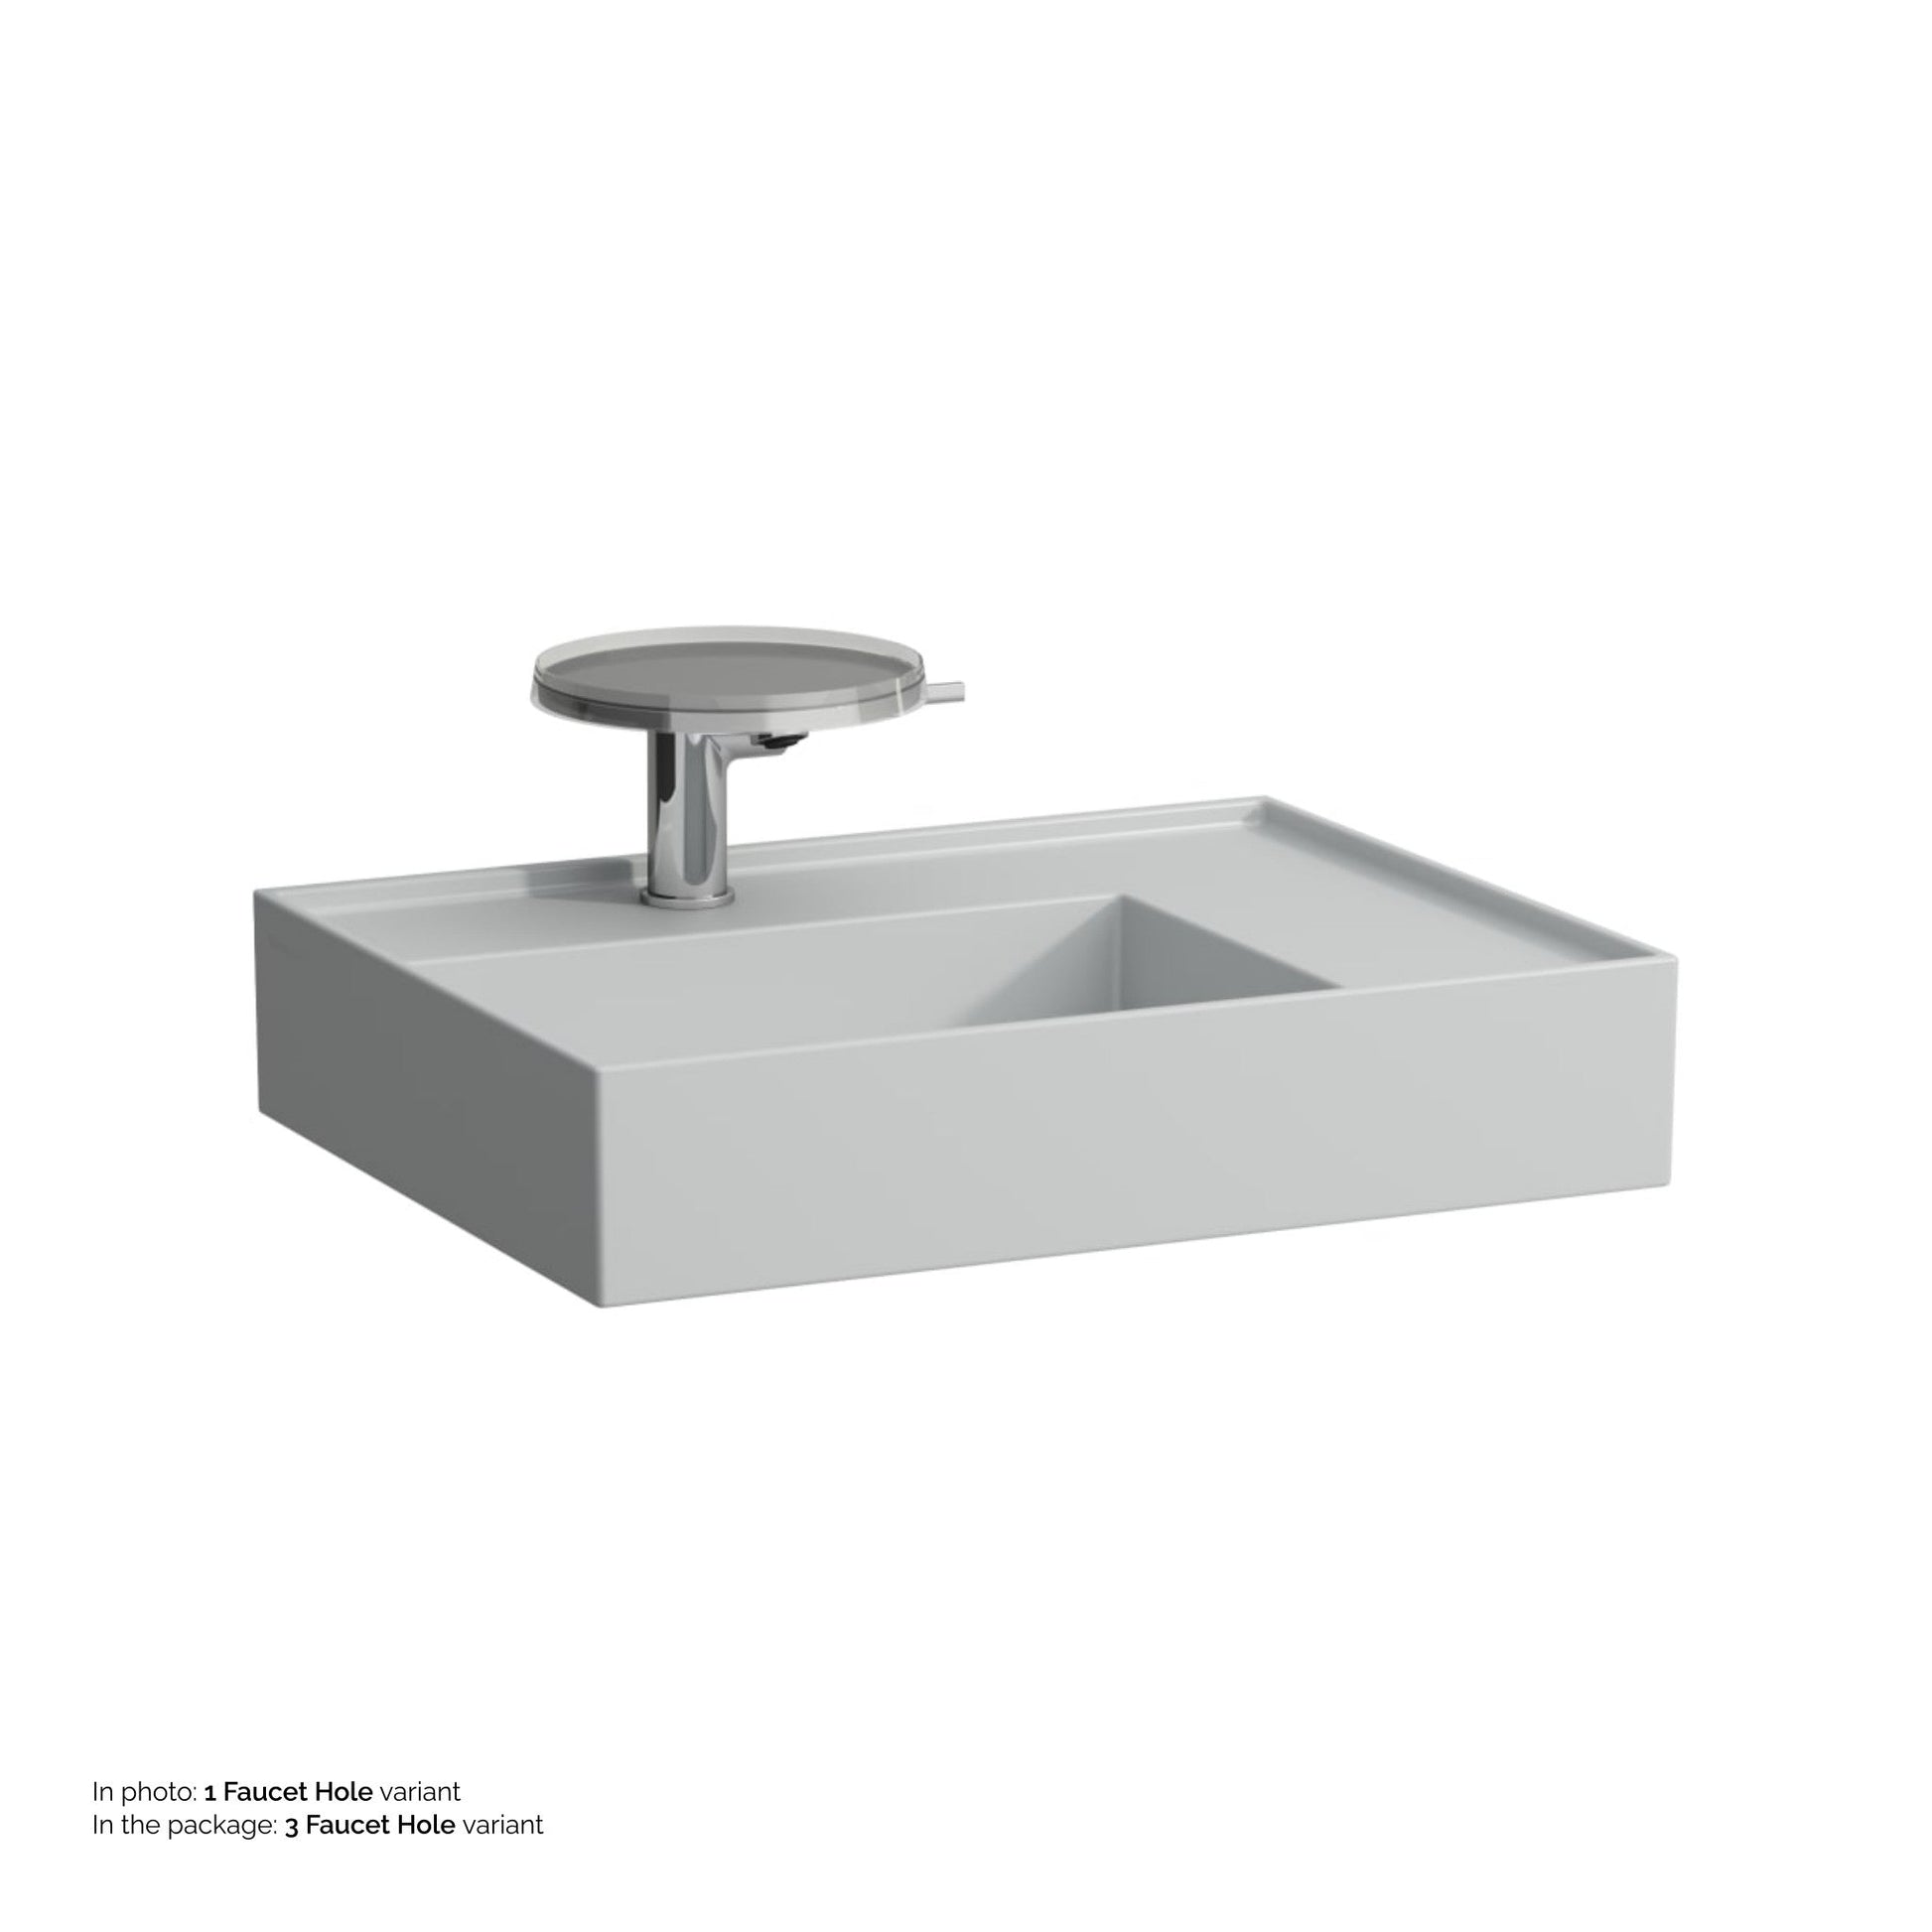 Laufen Kartell 24" x 18" Matte Gray Countertop Shelf-Right Bathroom Sink With 3 Faucet Holes